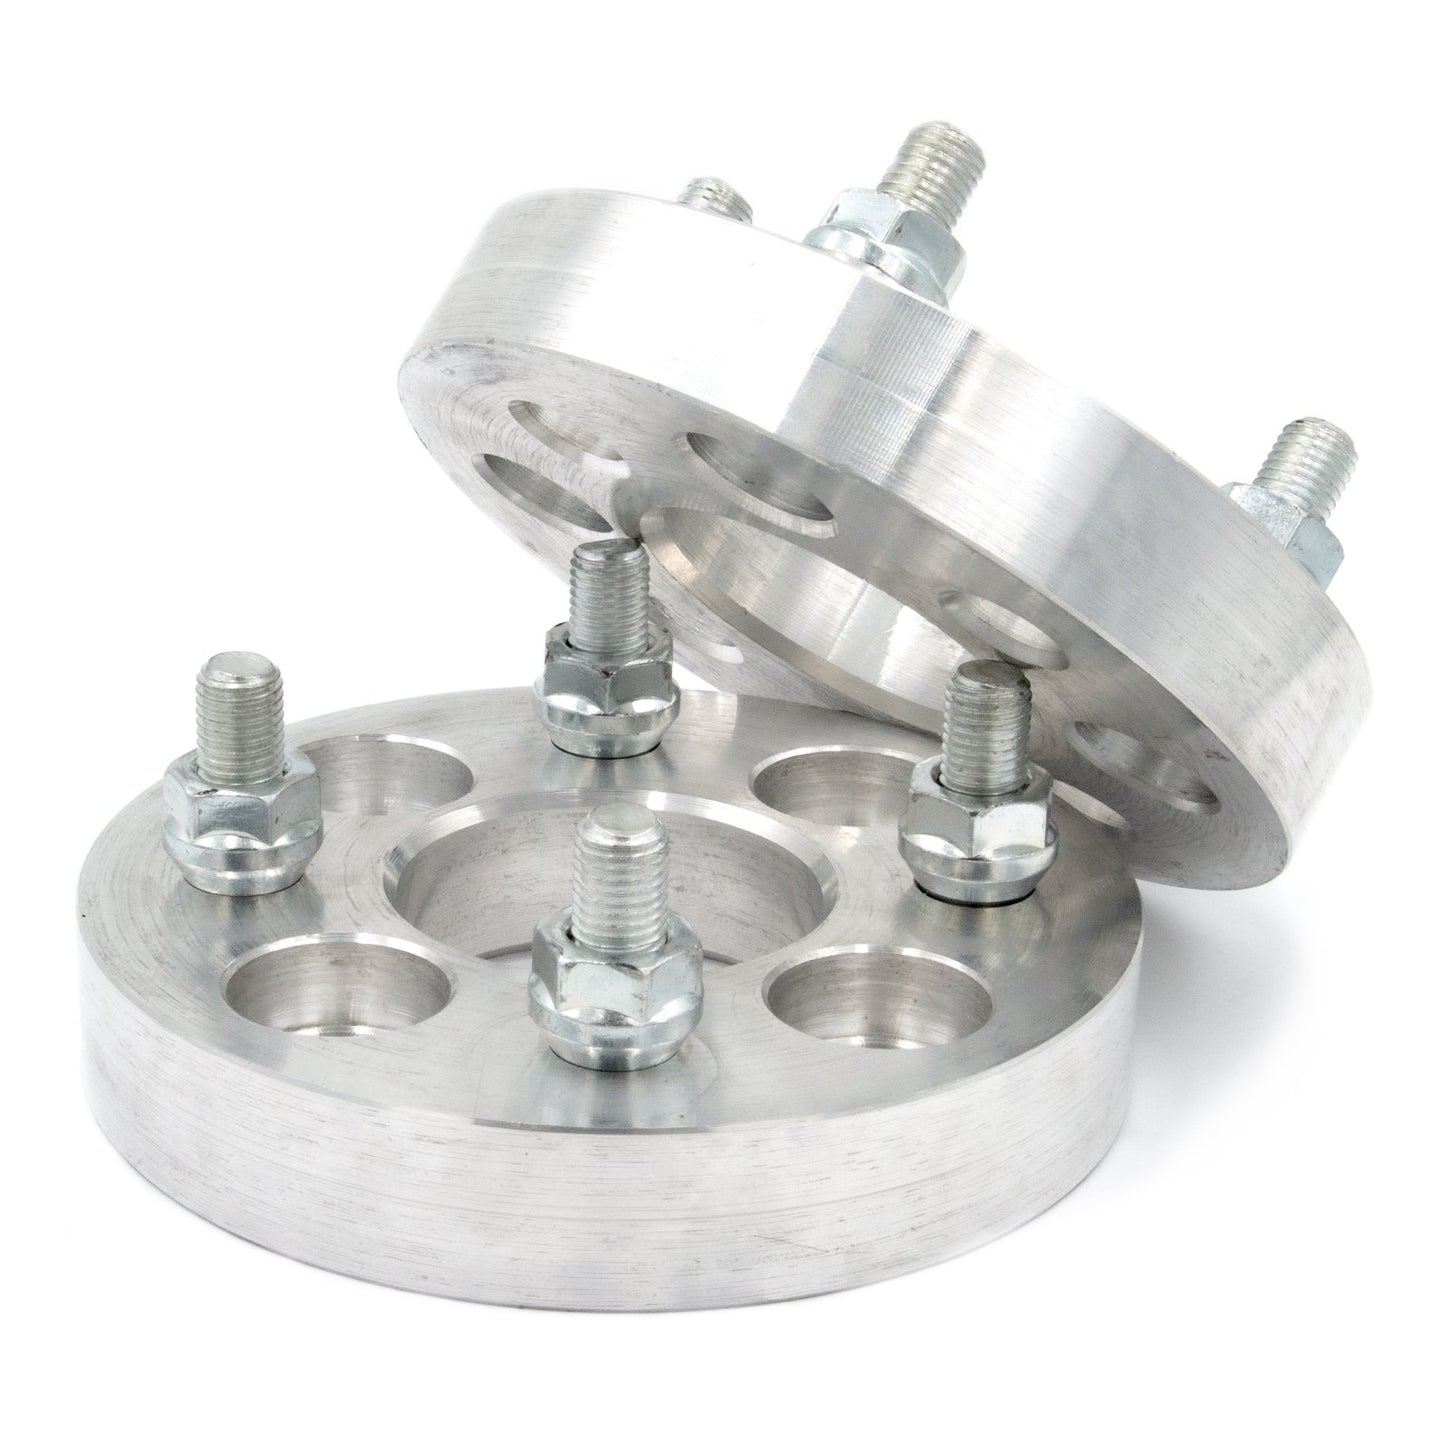 4x4.25" to 4x4.25" Wheel Spacer/Adapter - Thickness: 3/4"- 4"